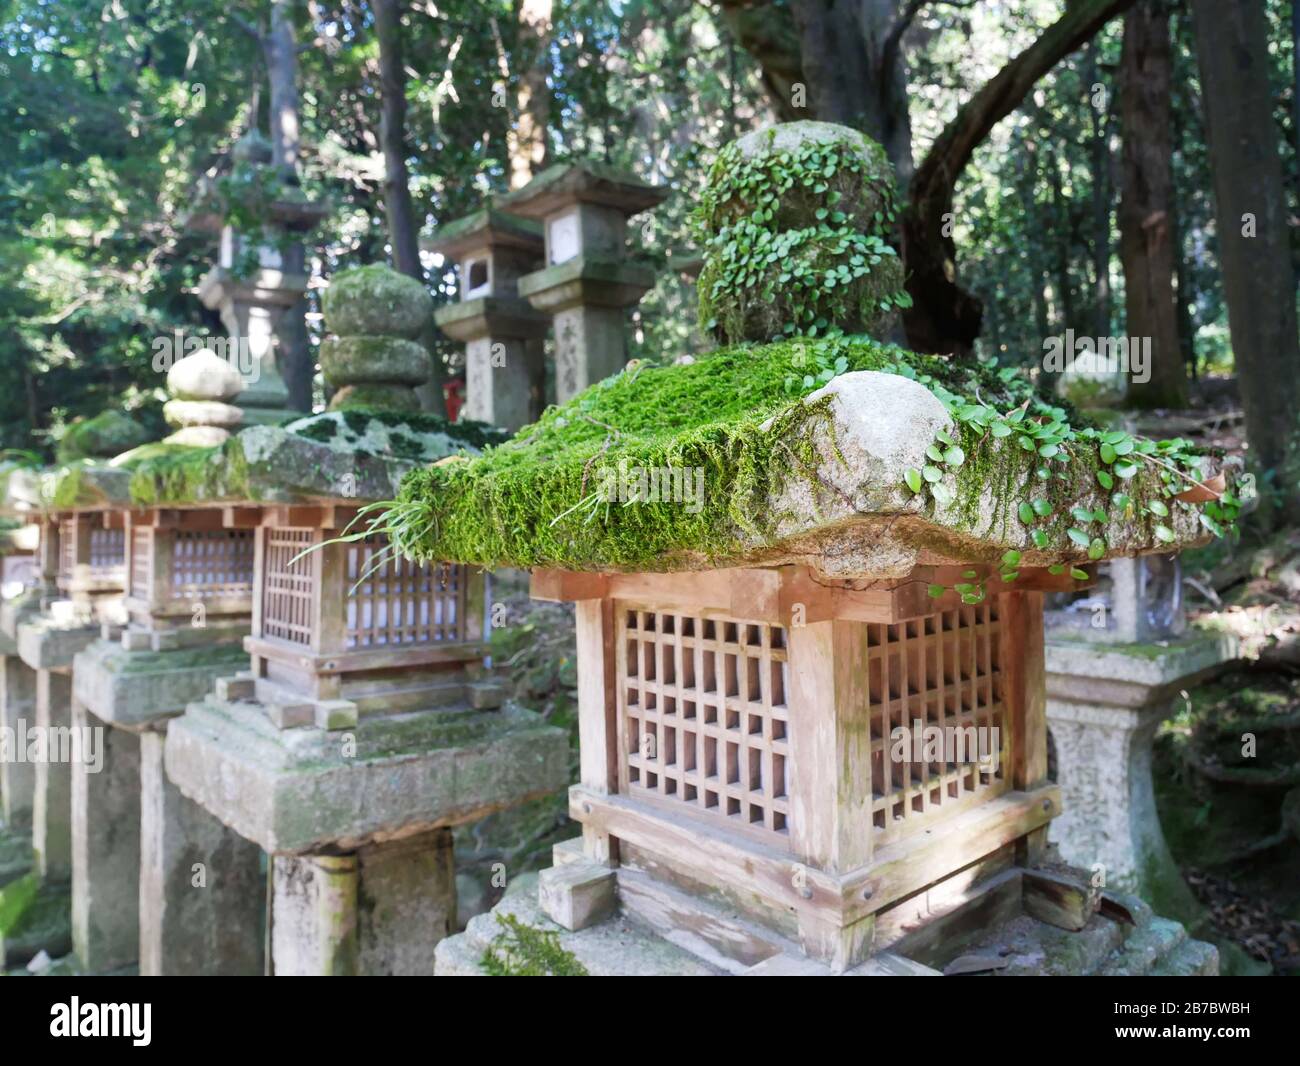 Mossy stone lanterns surrounding a temple in Japan Stock Photo